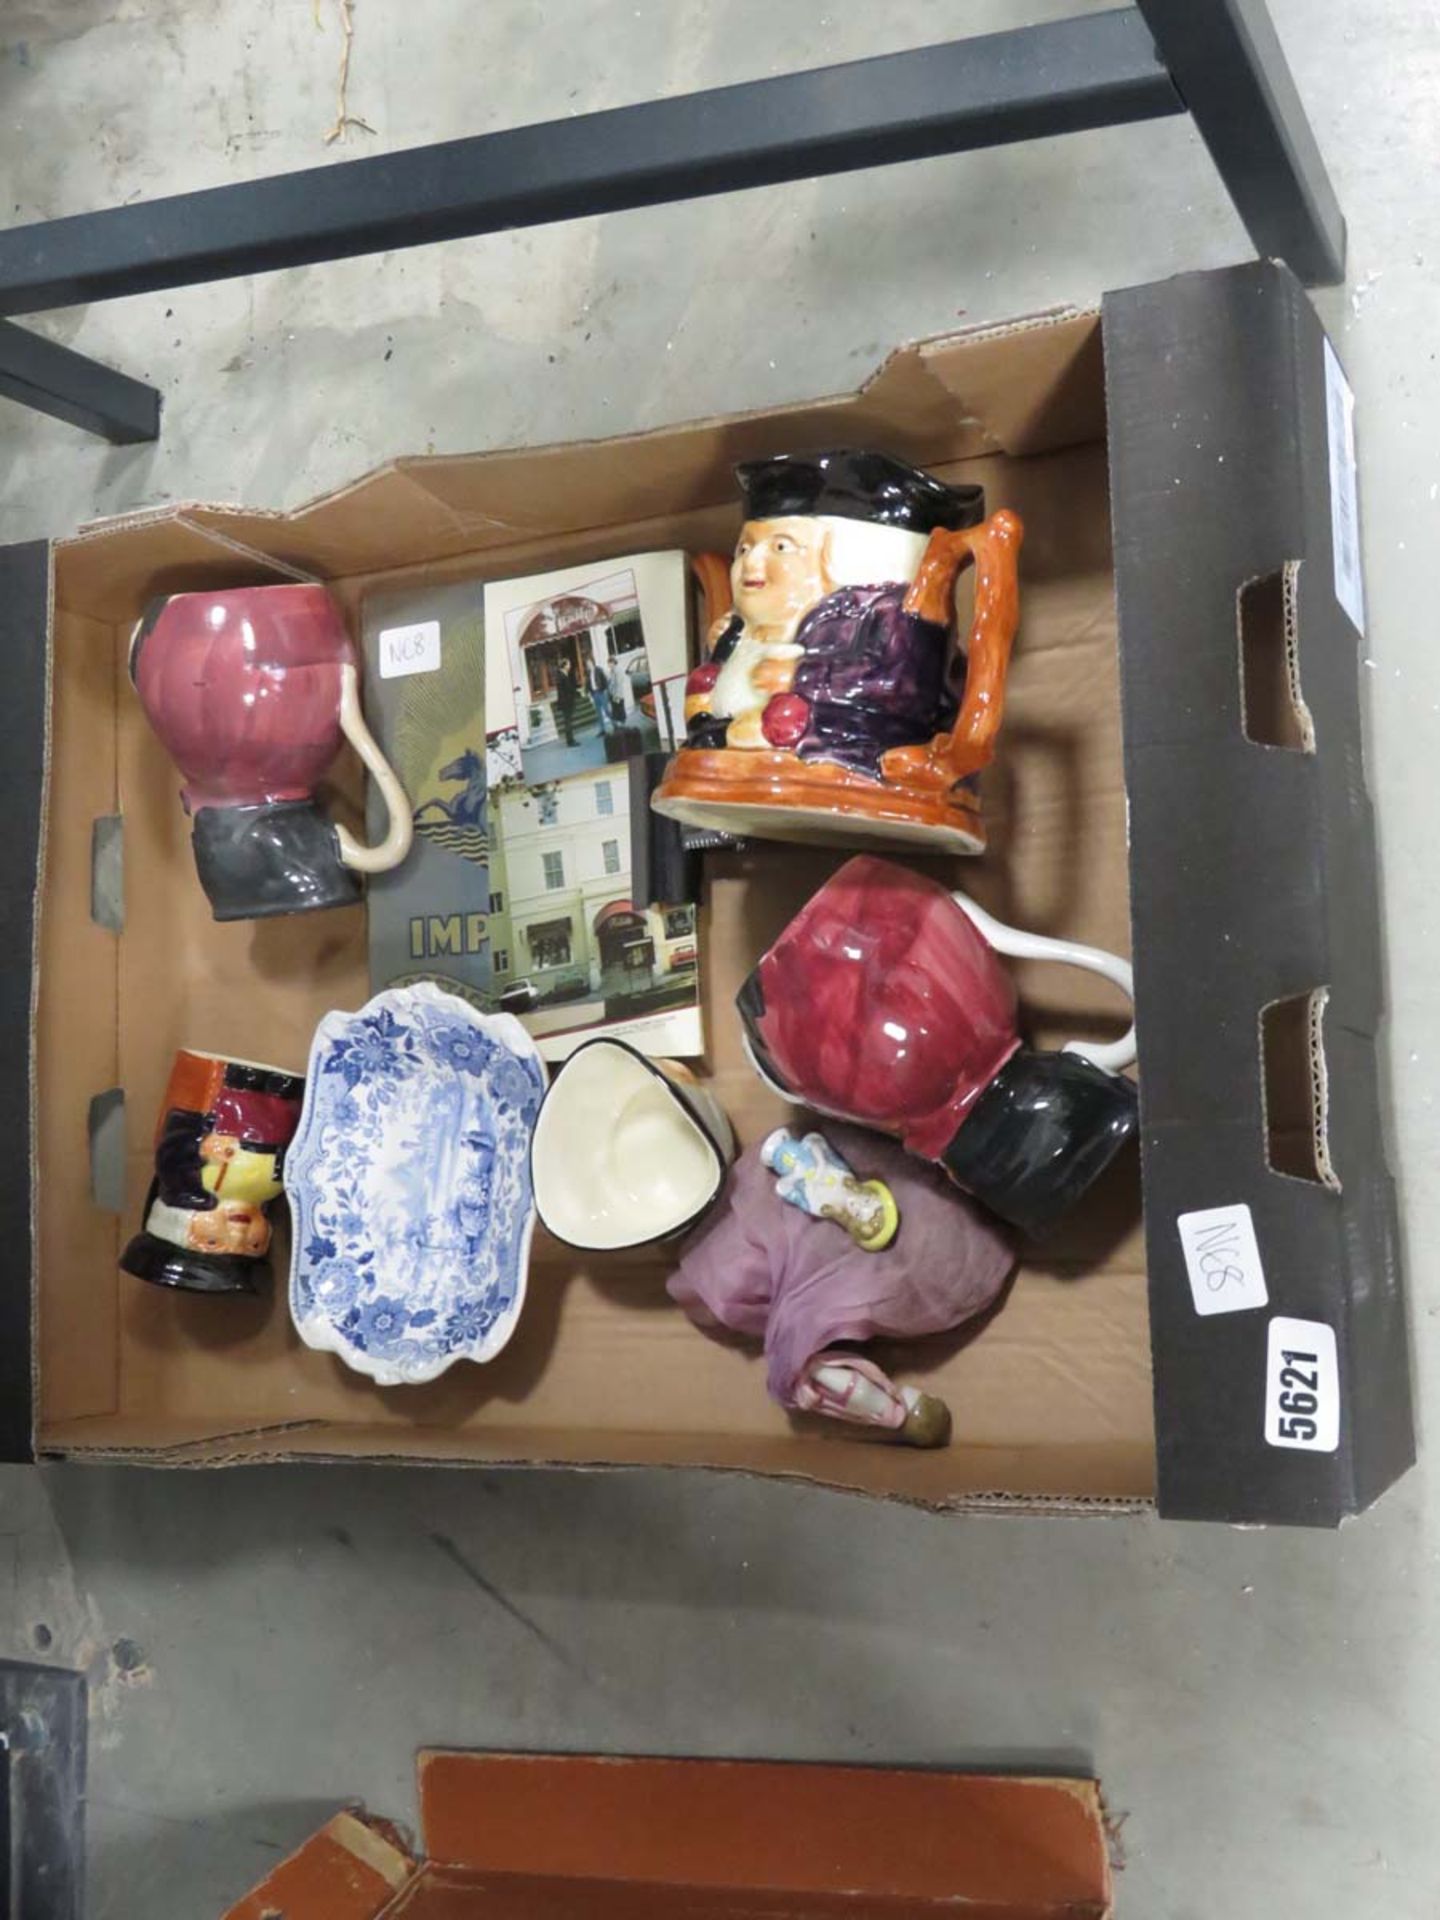 Box containing Toby jugs and crockery